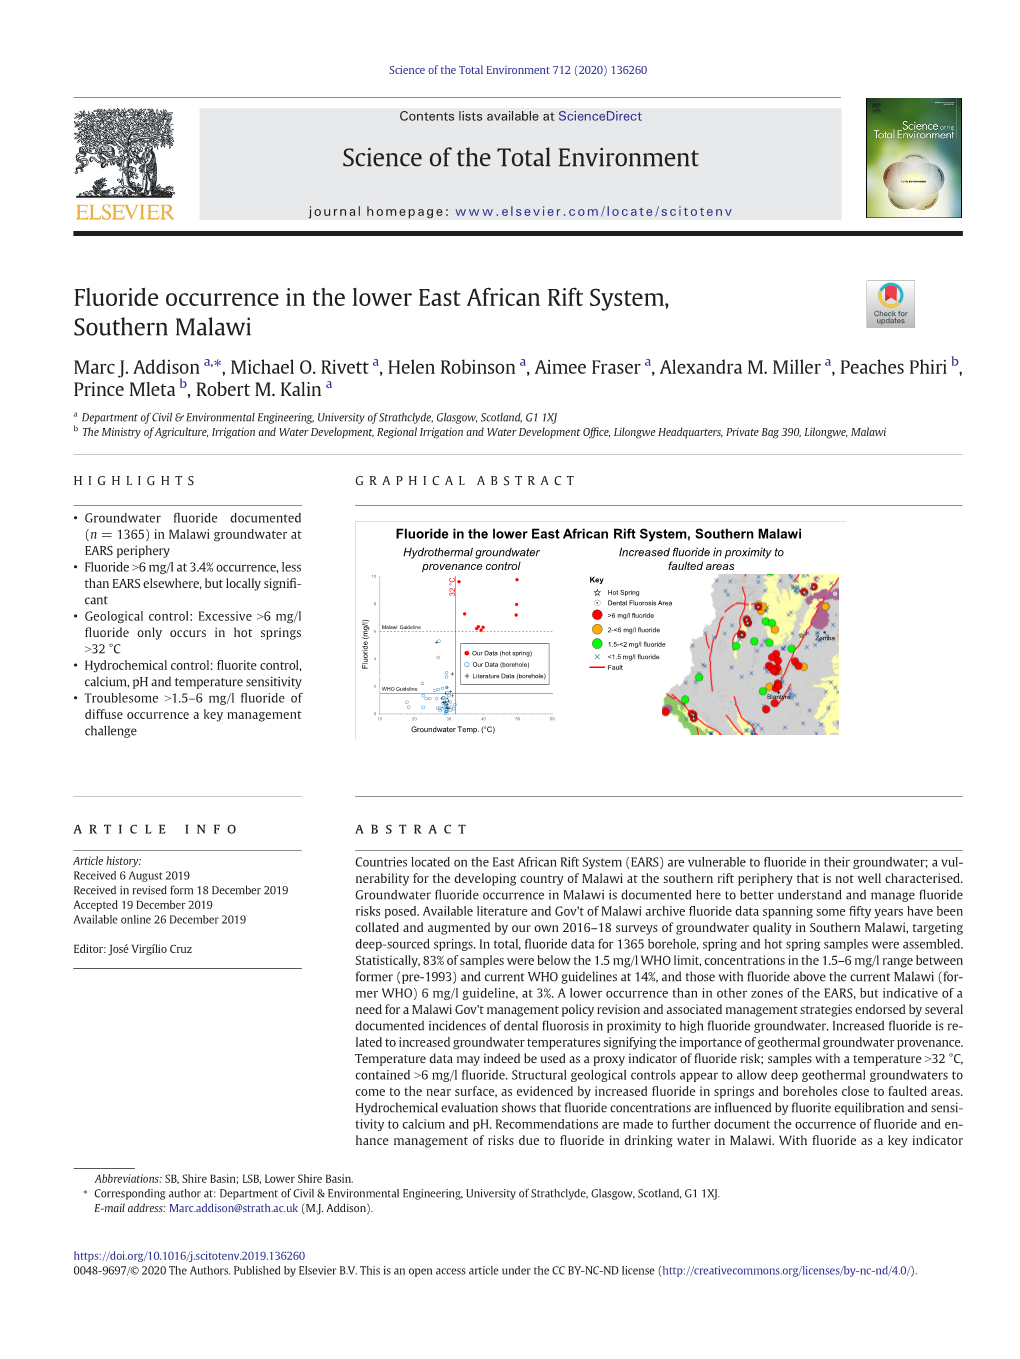 Fluoride Occurrence in the Lower East African Rift System, Southern Malawi